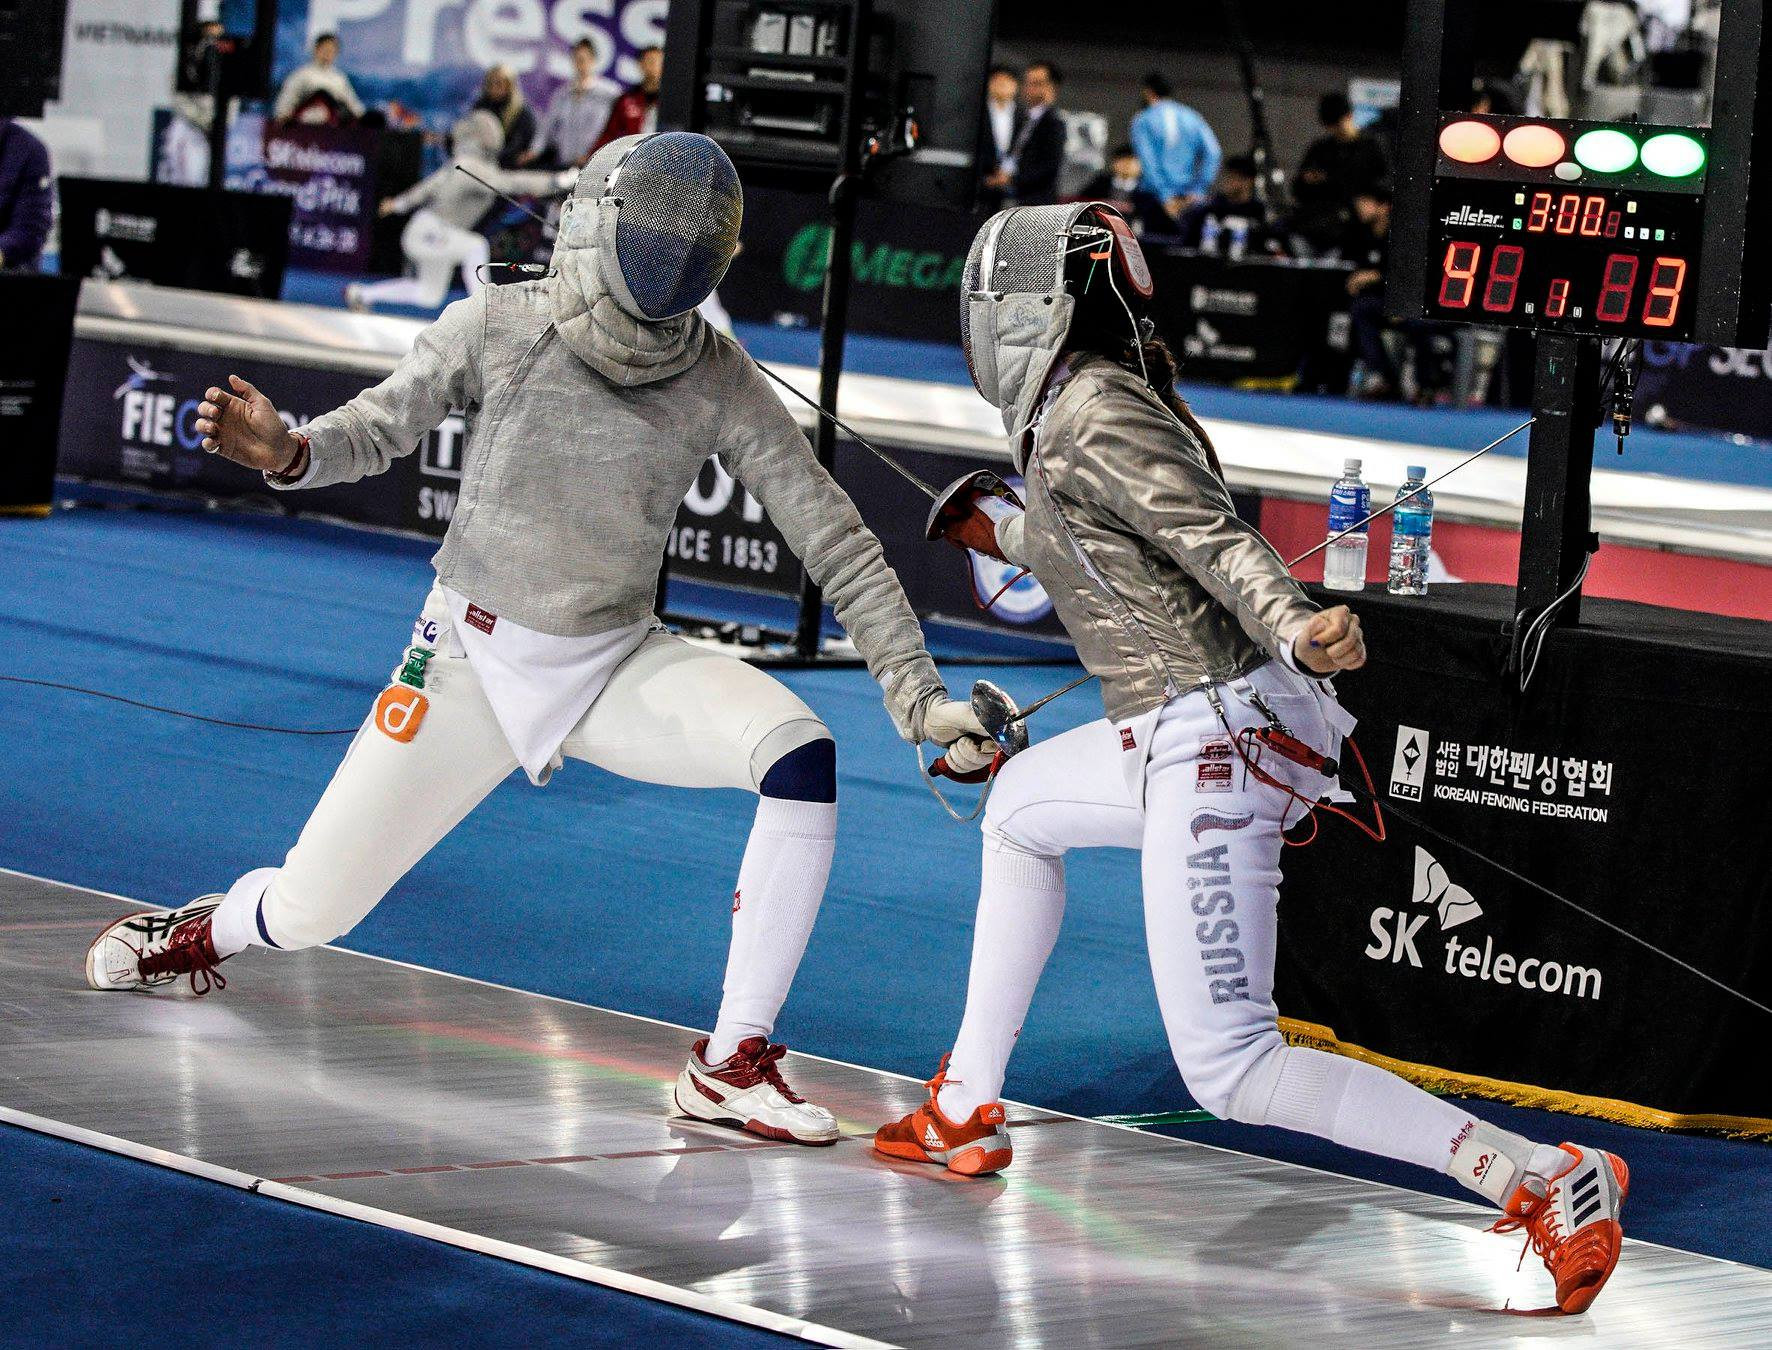 The FIE Sabre Grand Prix in Seoul is taking place at SK Handball Gym ©FIE